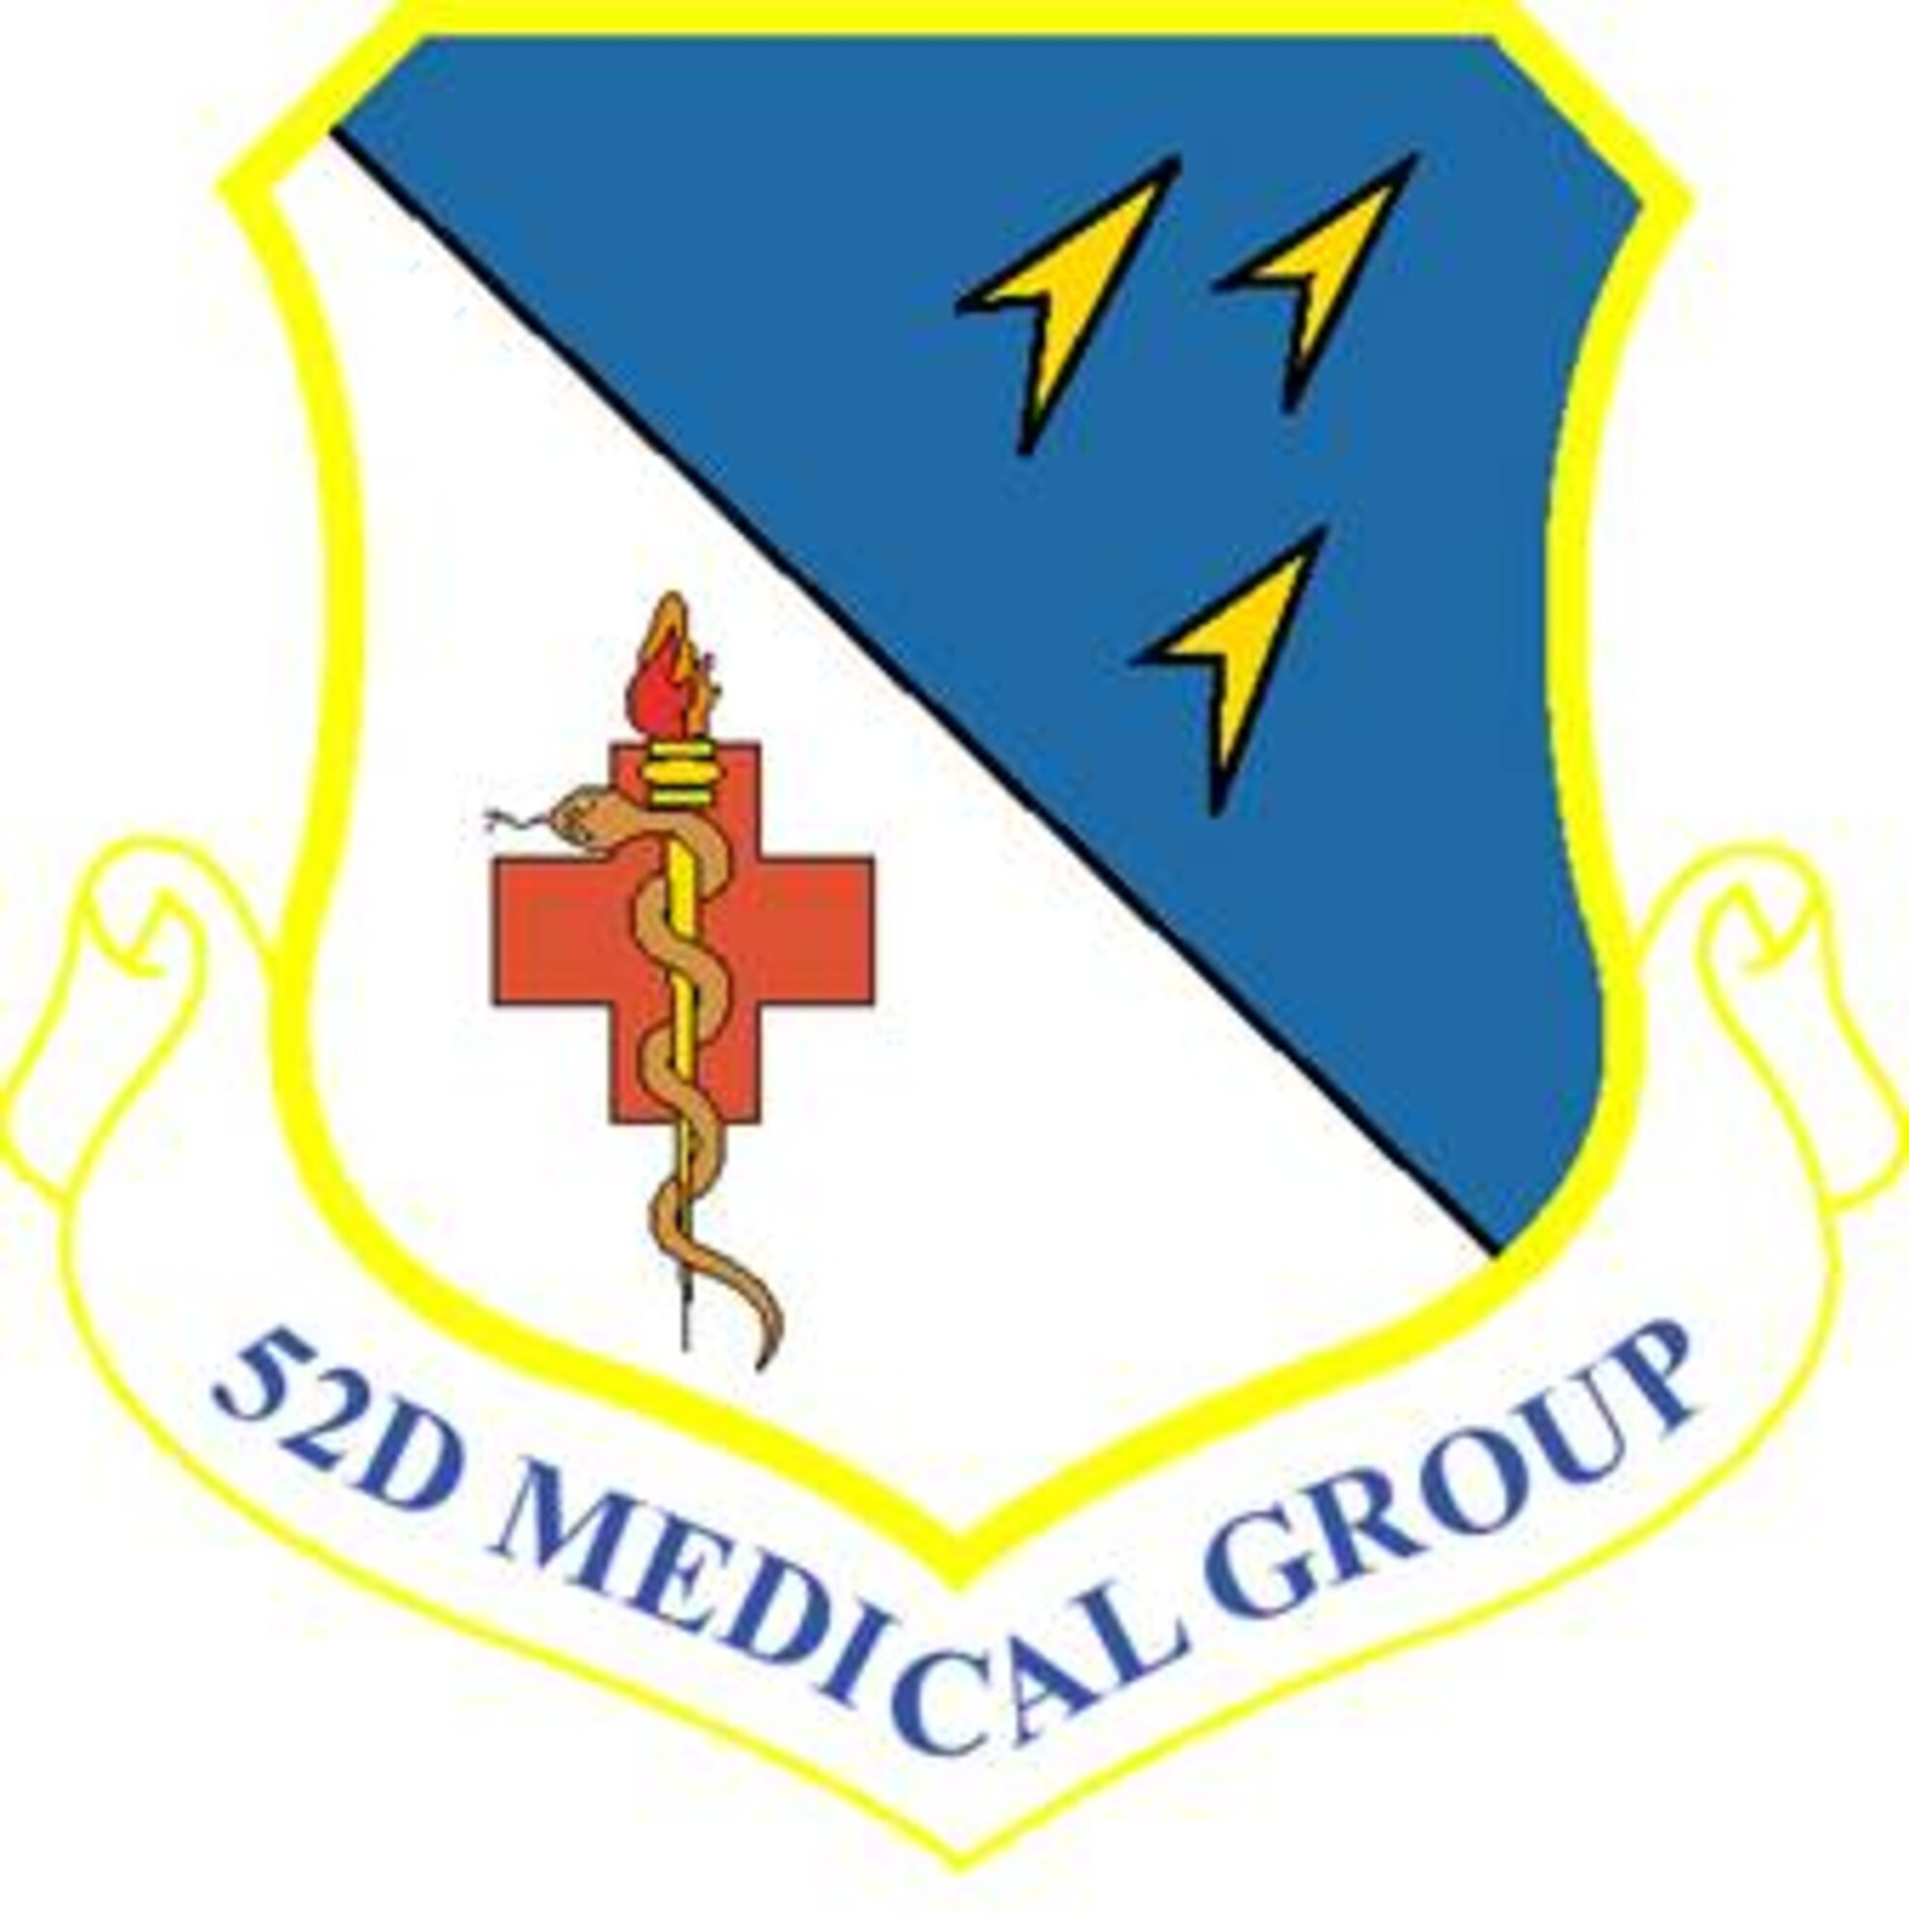 52nd Medical Group patch